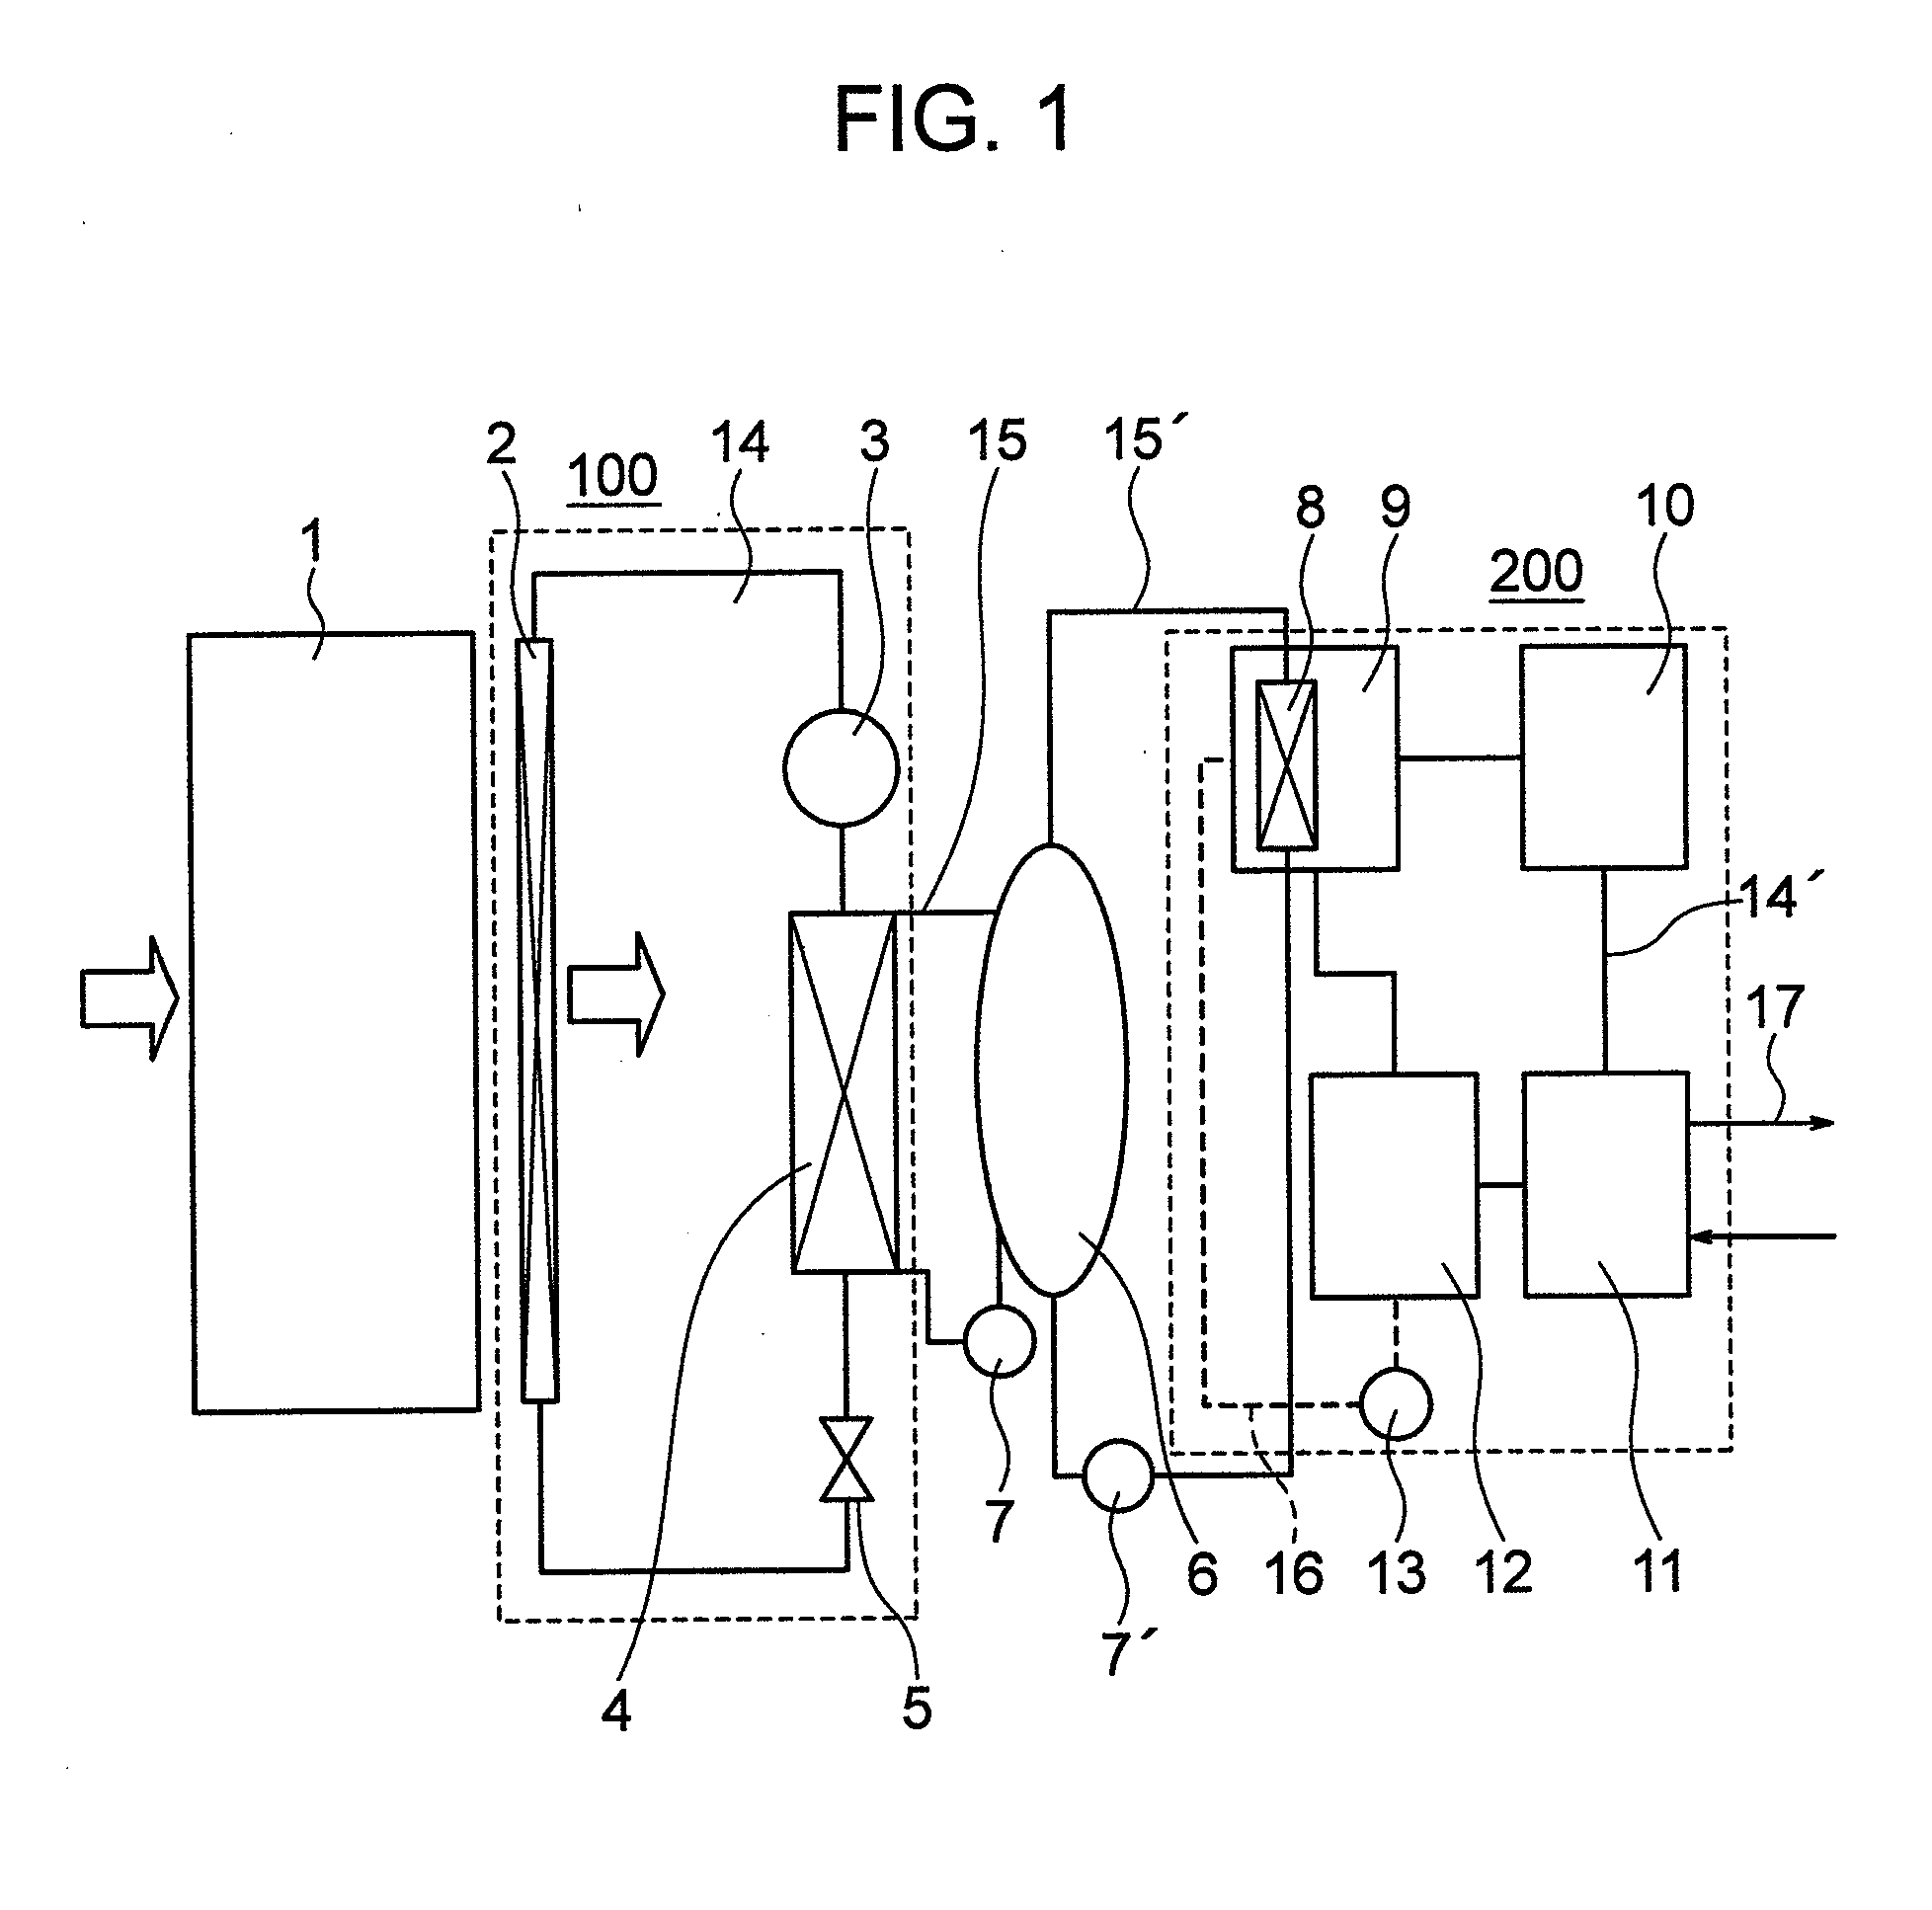 Electronic equipment system